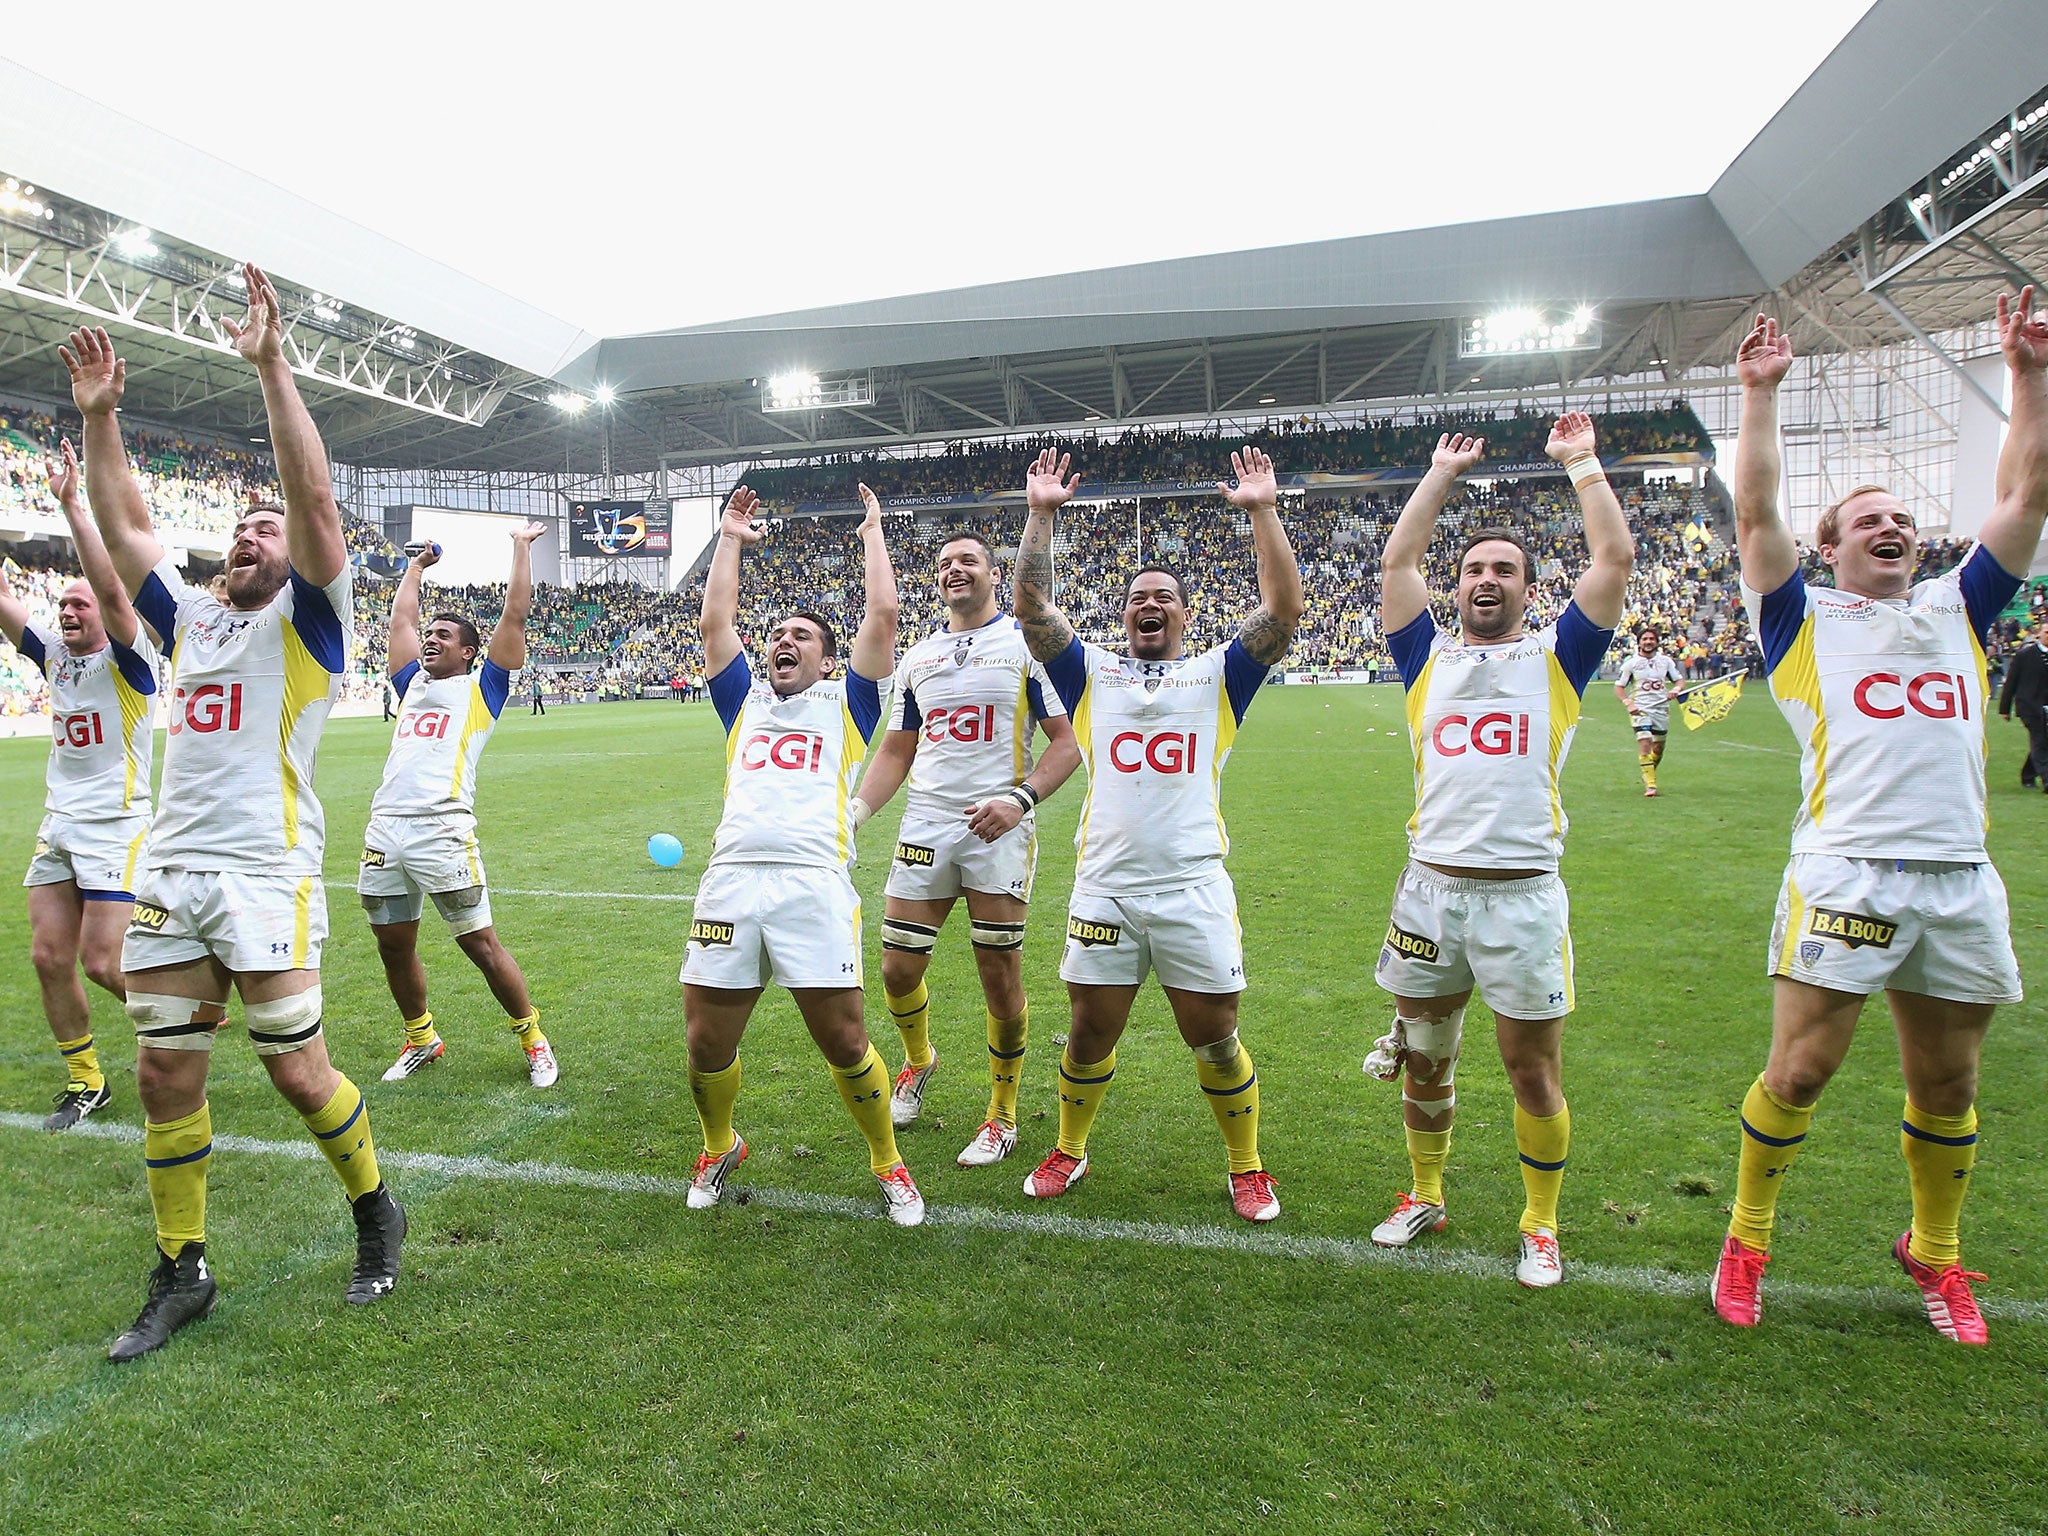 Clermont Auvergne beat Saracens in the semi-final